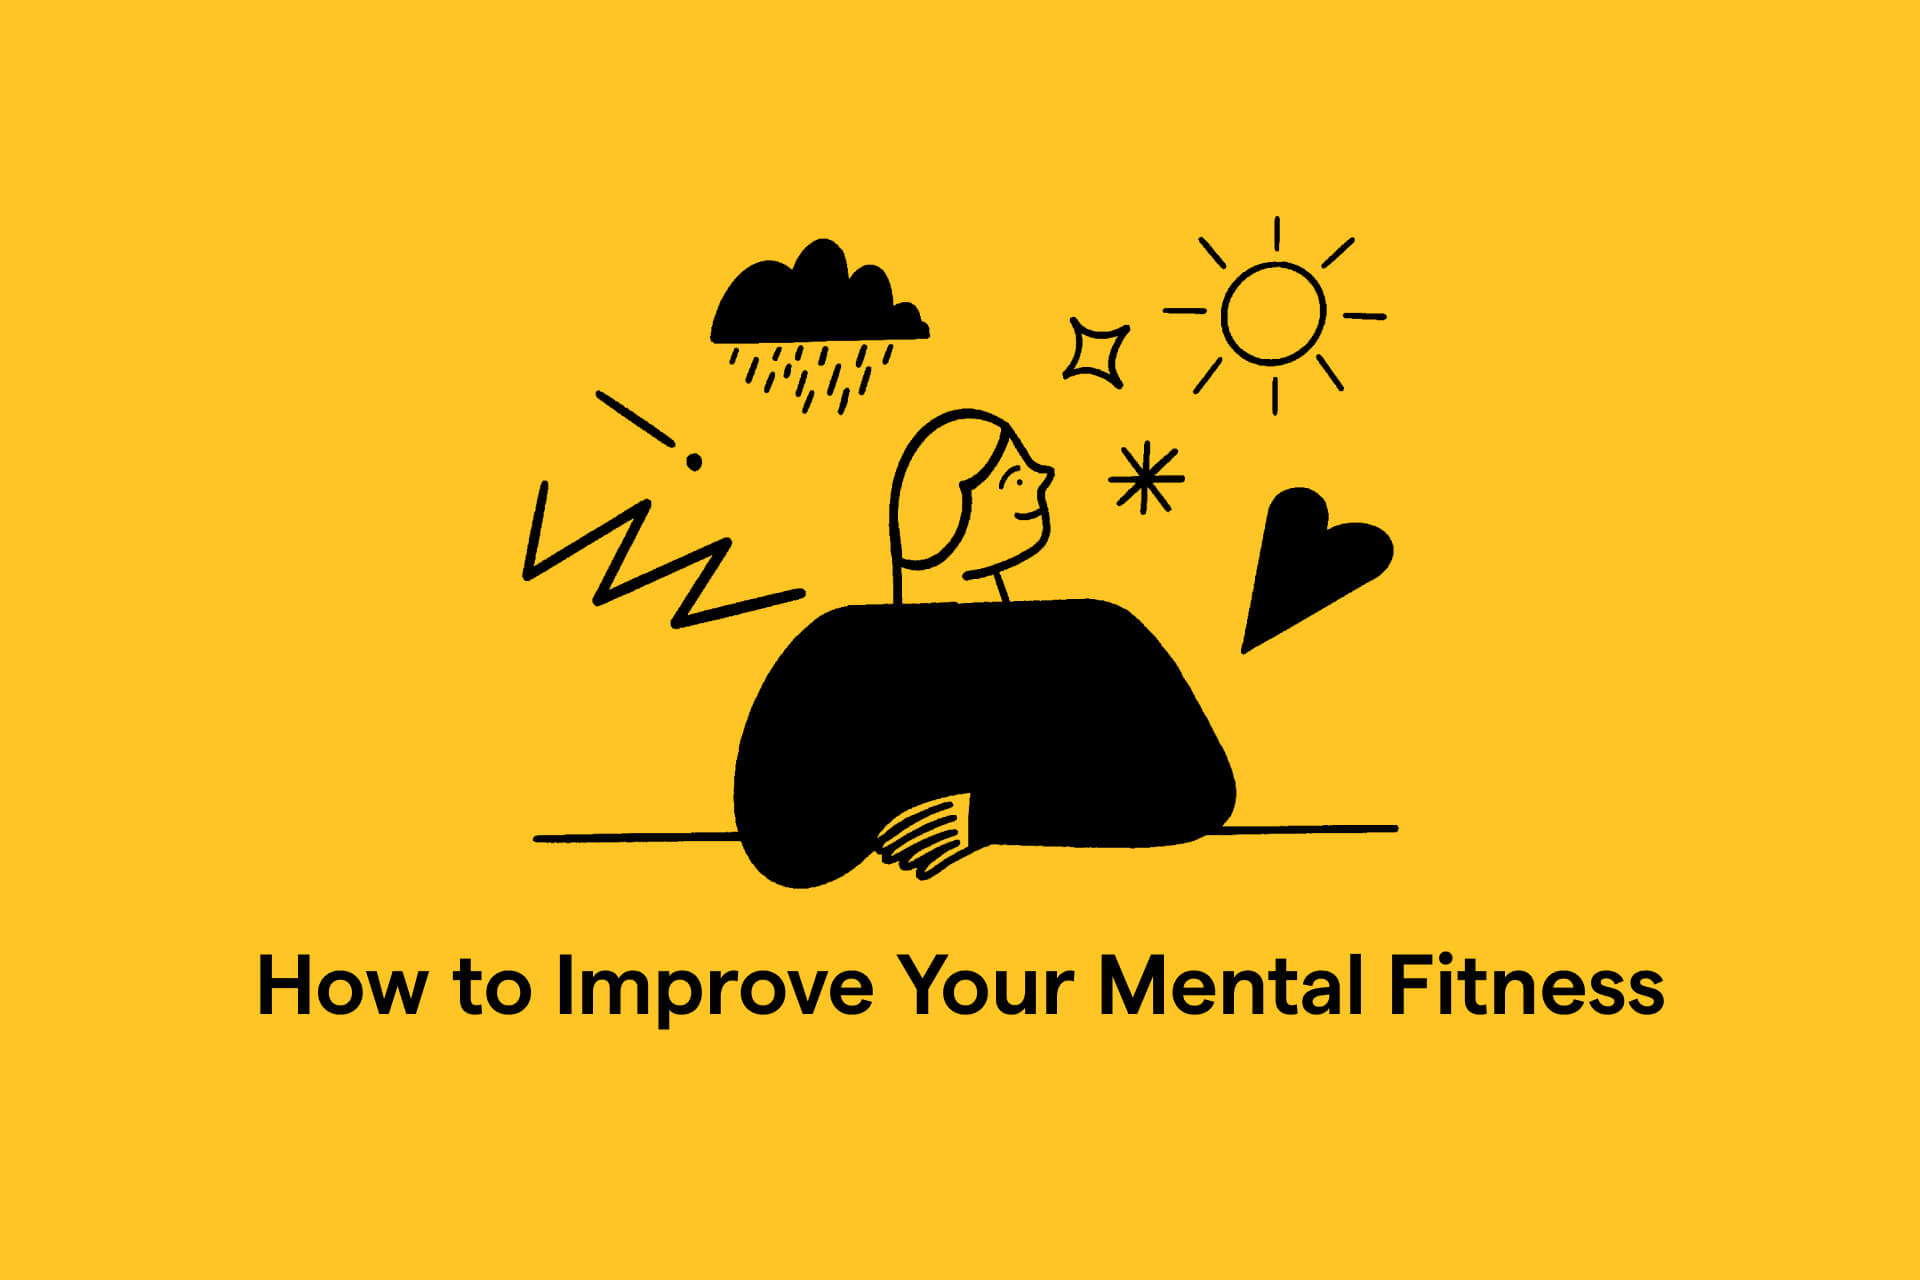 How to improve your mental fitness